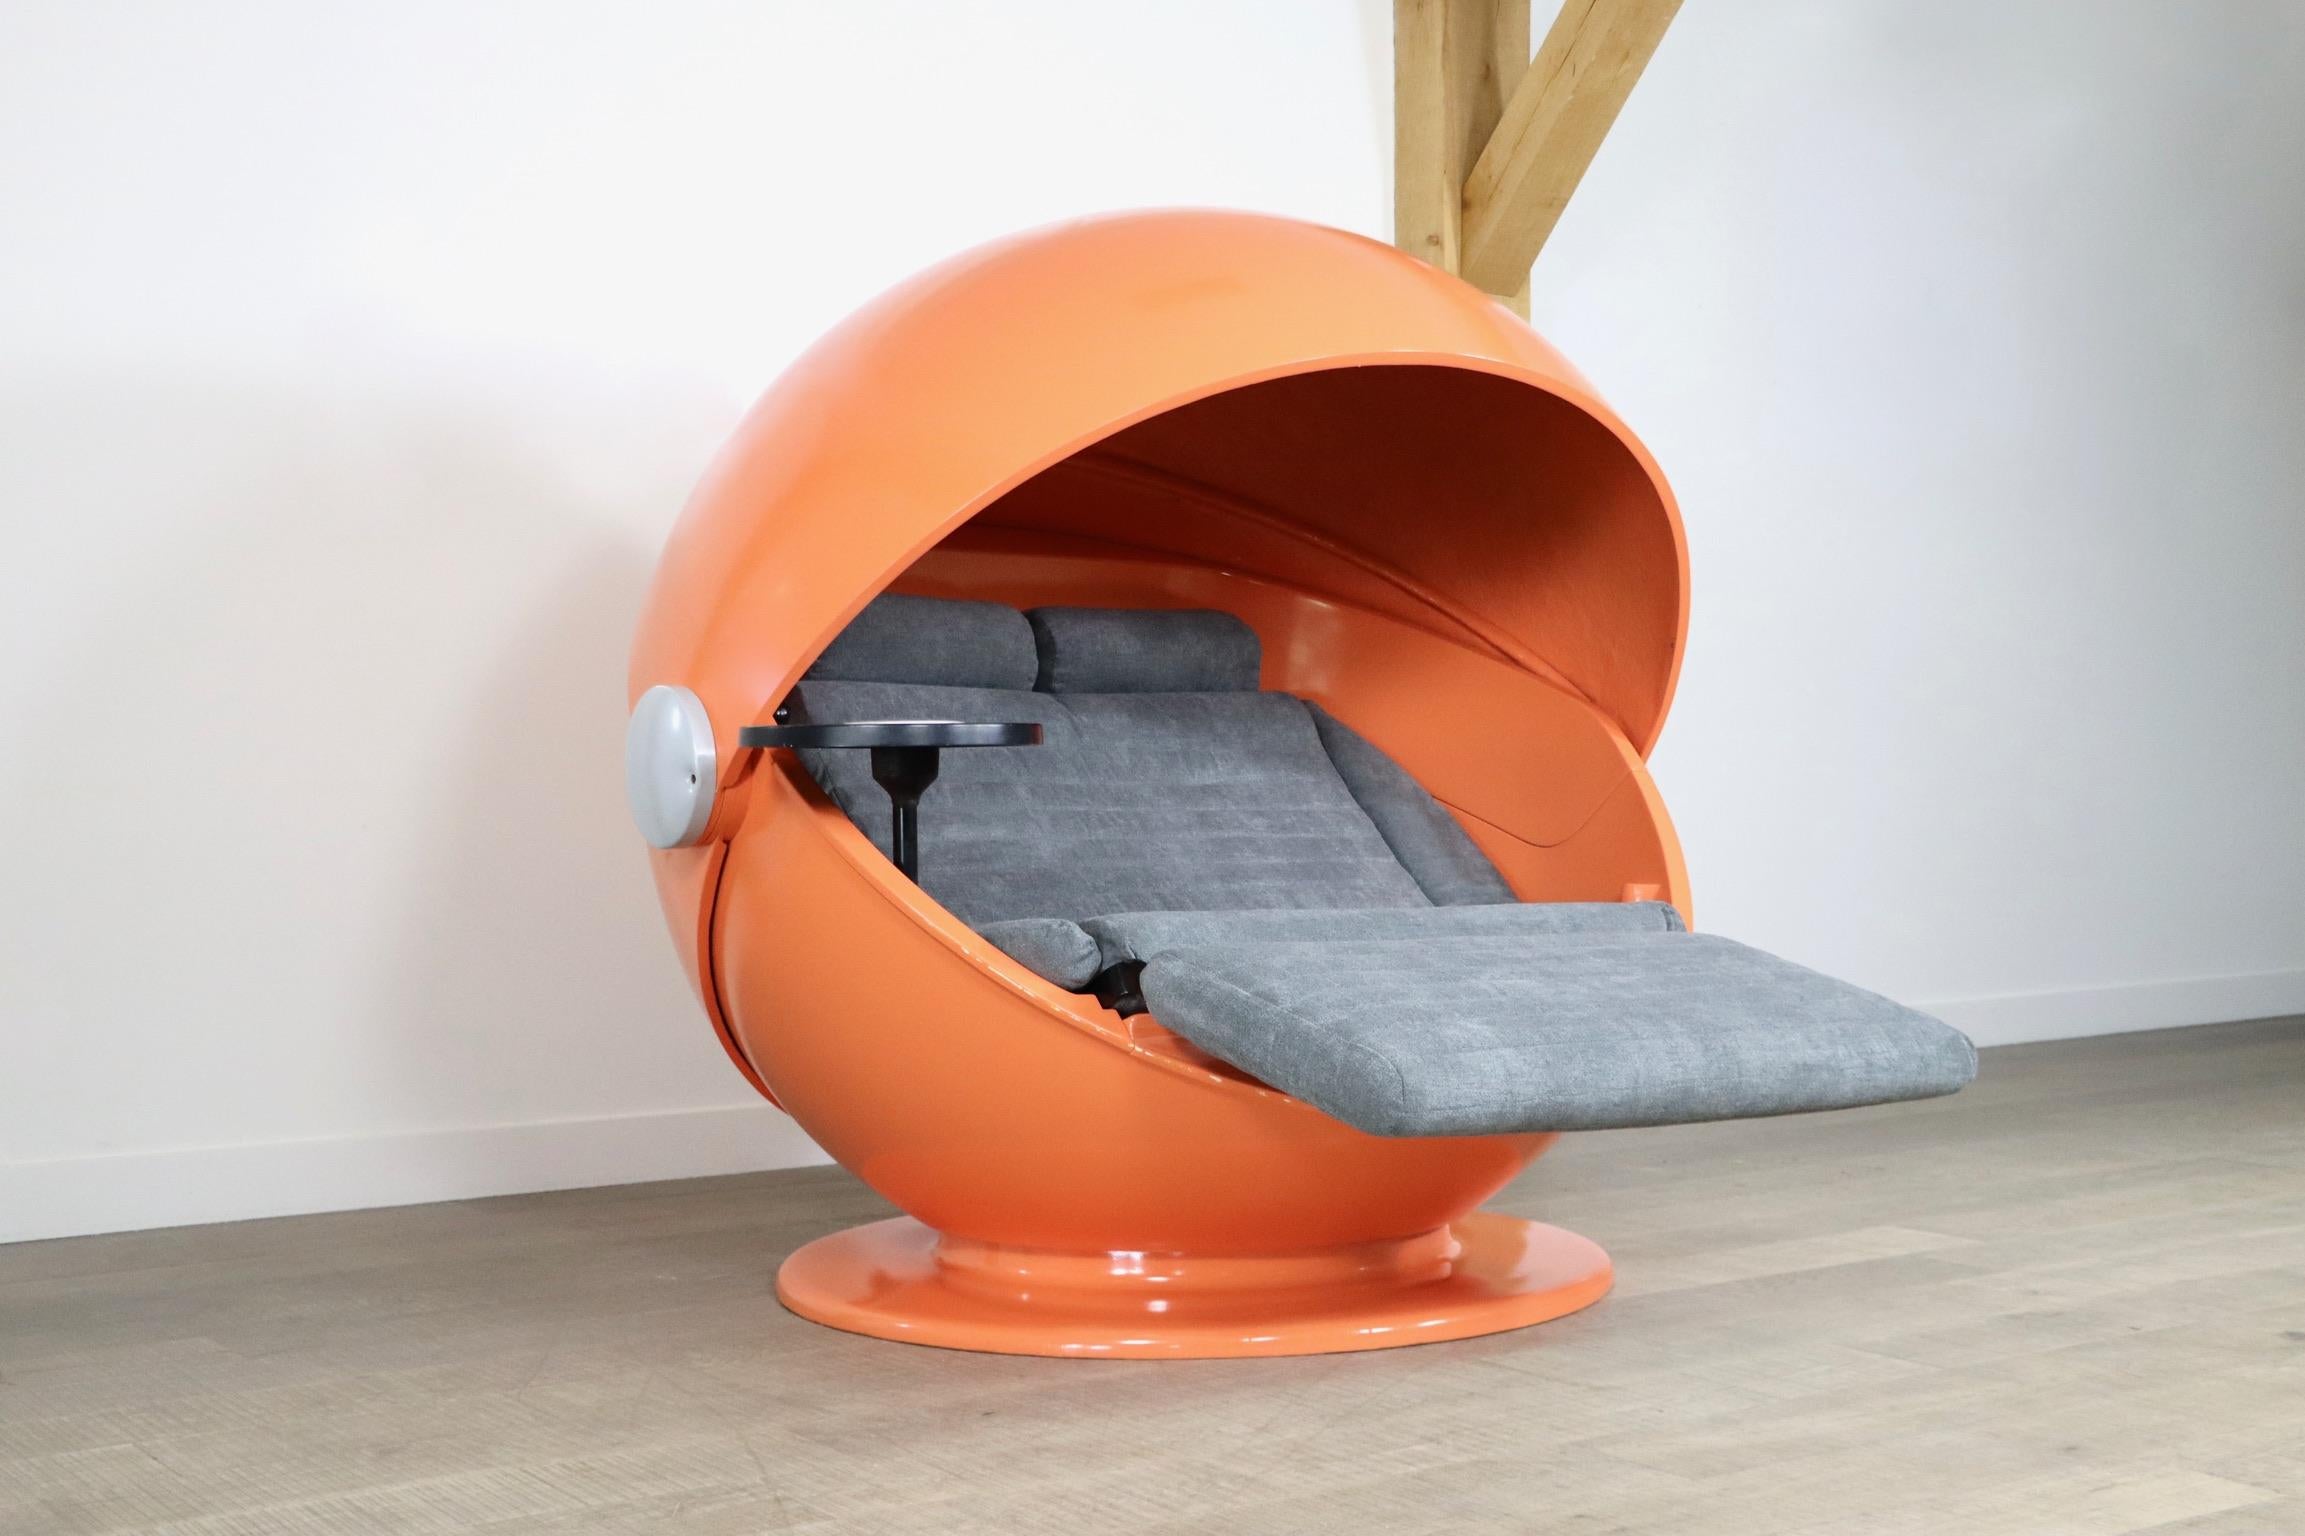 One of only 50 ever produced sunball chairs by Günter Ferdinand Ris and Herbert Selldorf for Rosenthal, 1969.
This particular one has water resisting upholstery and one side table.
The beautiful orange shells fold open to reveal a double lounge